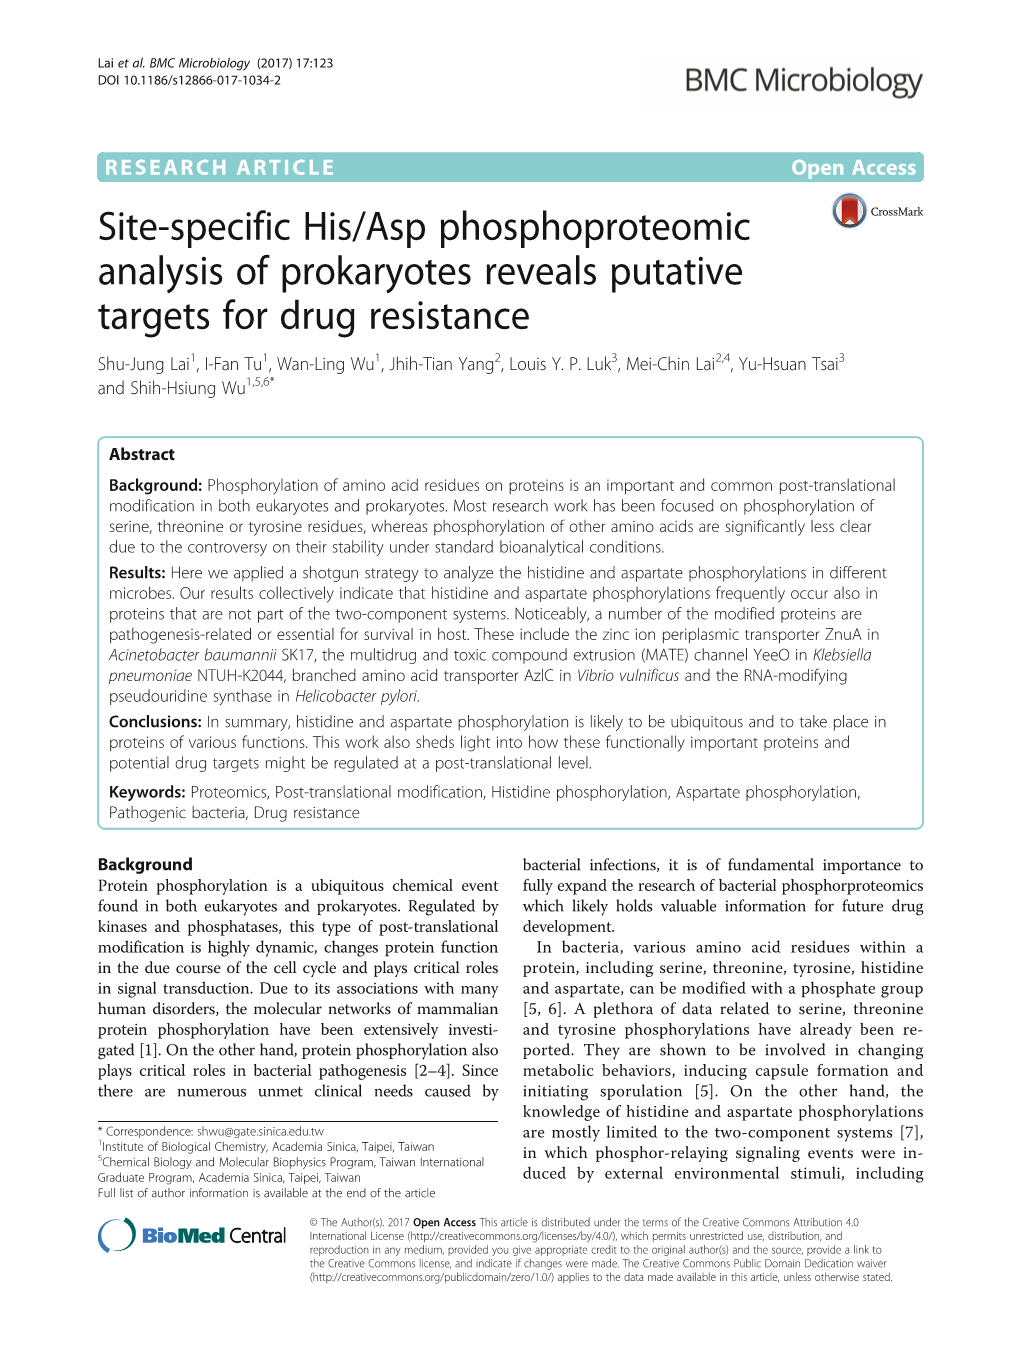 Site-Specific His/Asp Phosphoproteomic Analysis Of